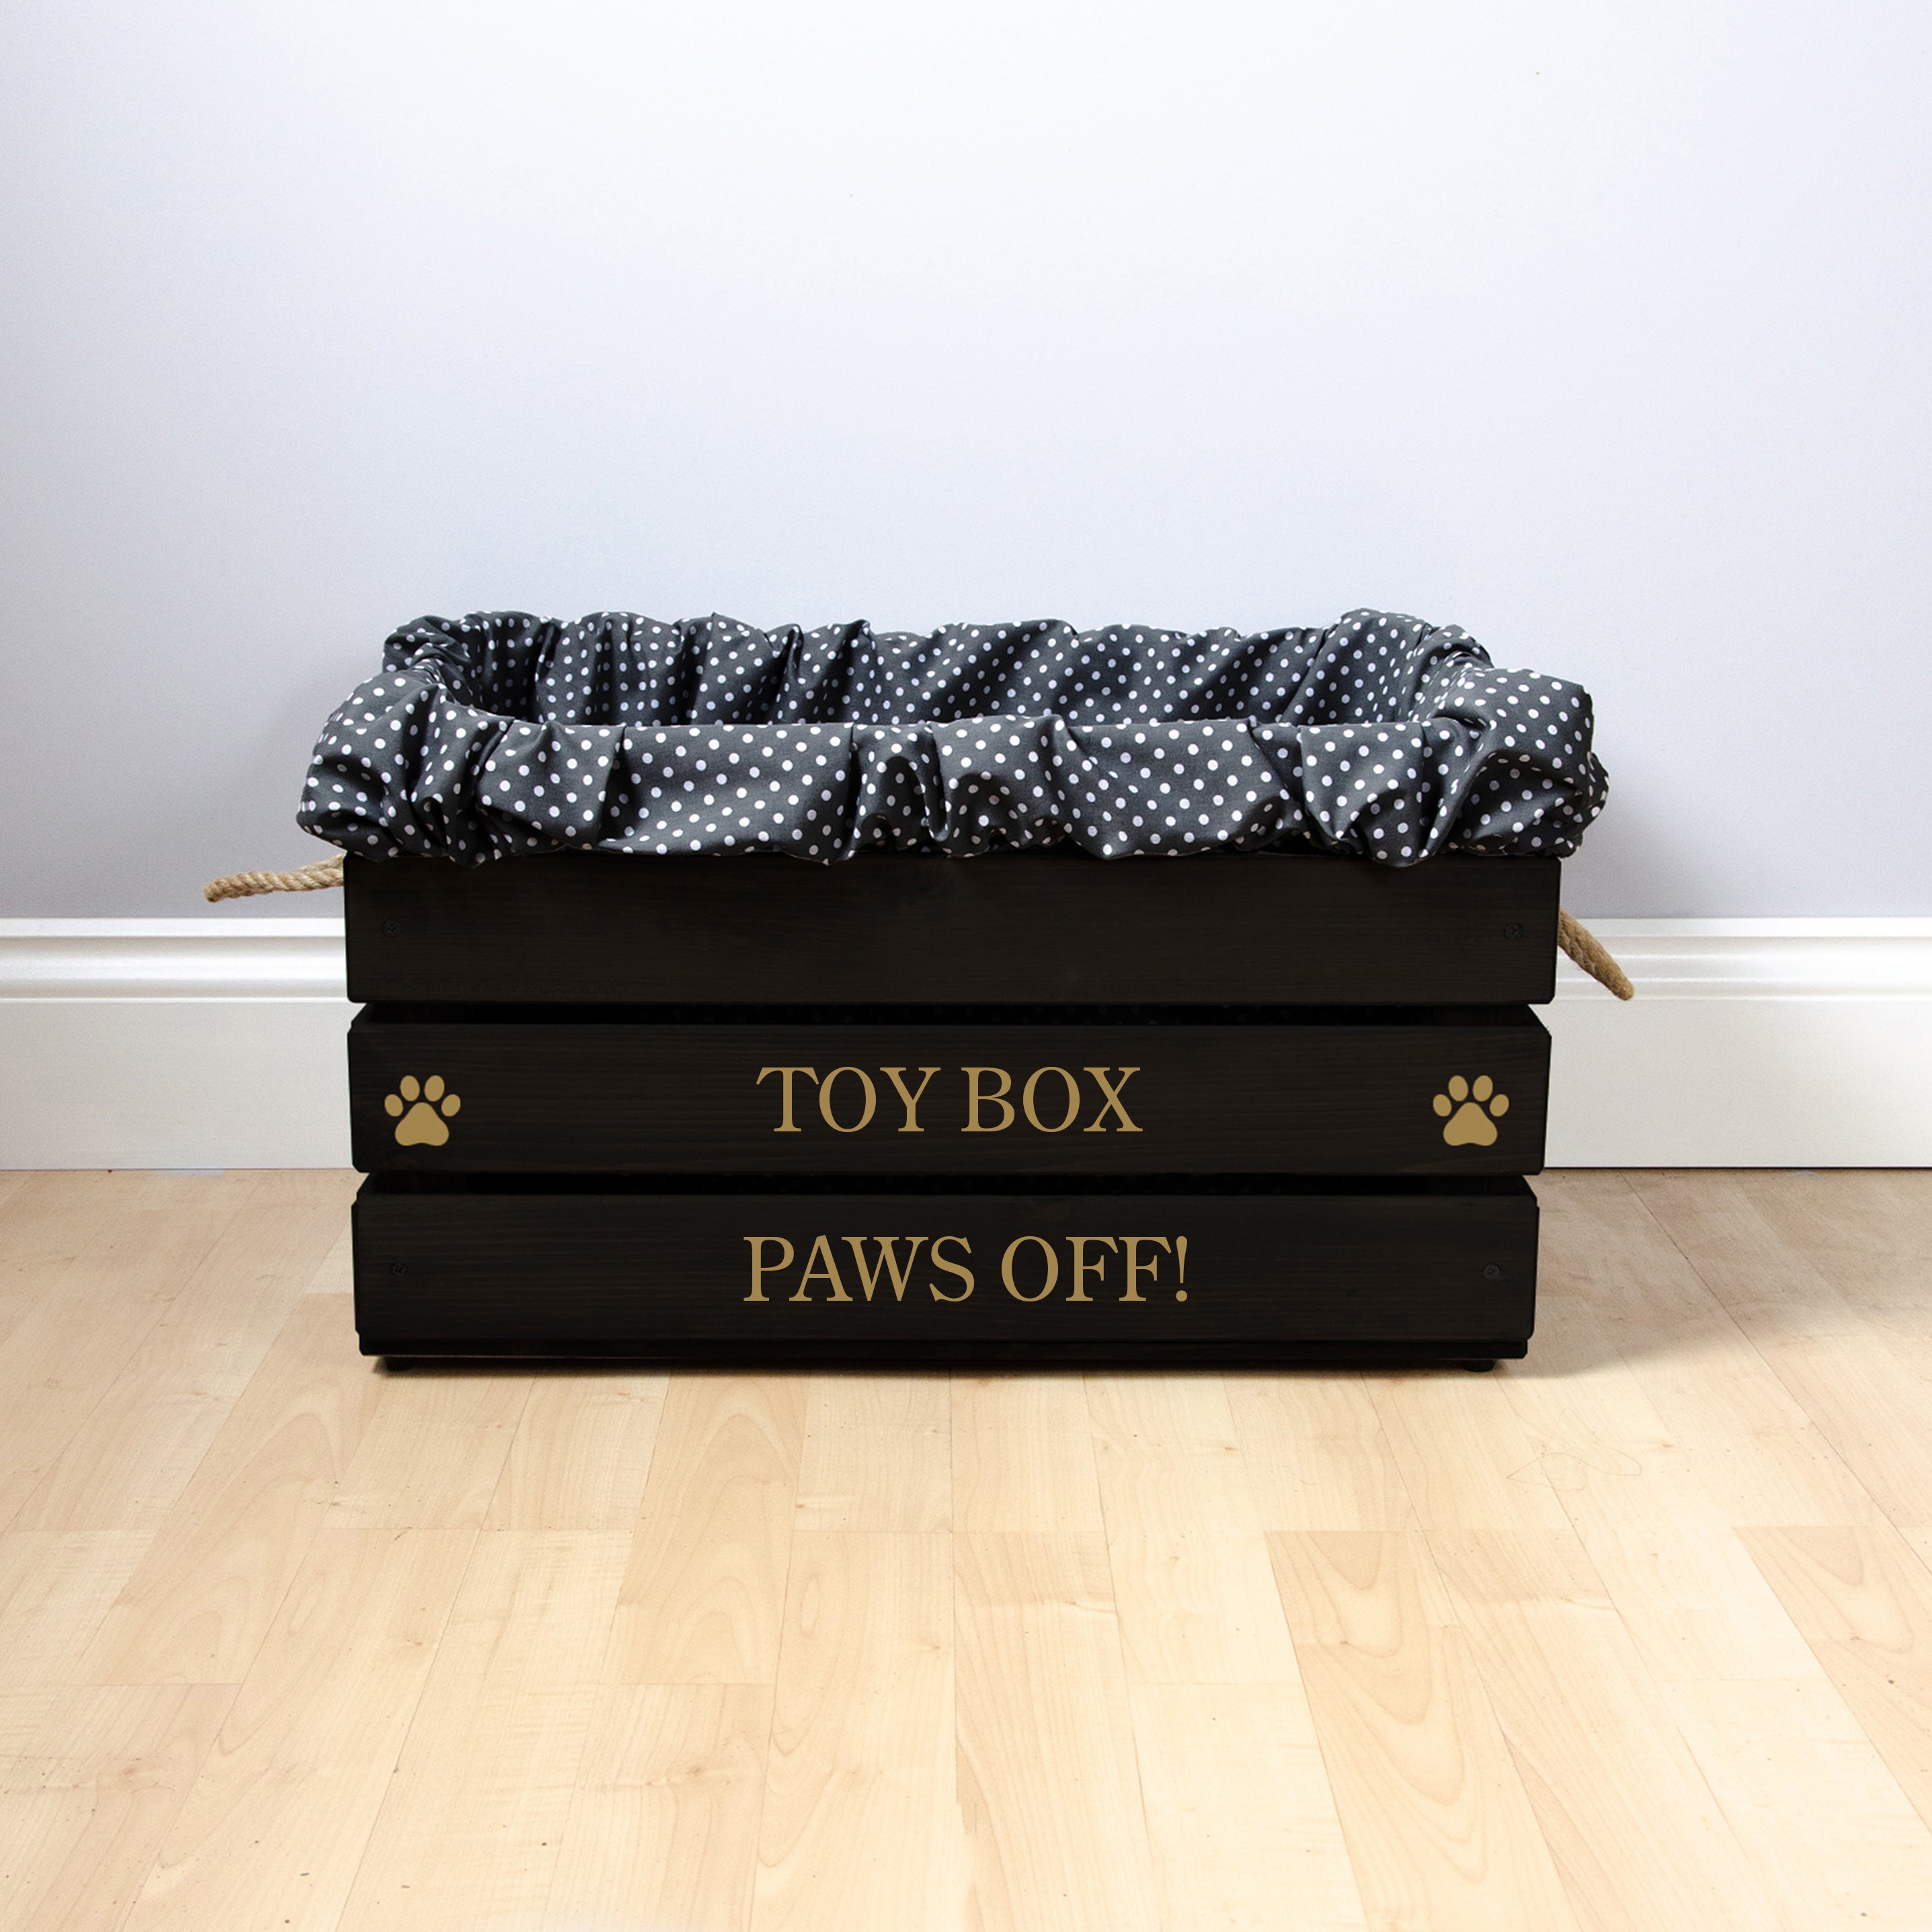 Medium Personalised Dog Toy Box with Removable Linen- Black, Dog Toys, Personalised Dog Toys, Dog Toy Box, Large pet toy box, Black Toy Box